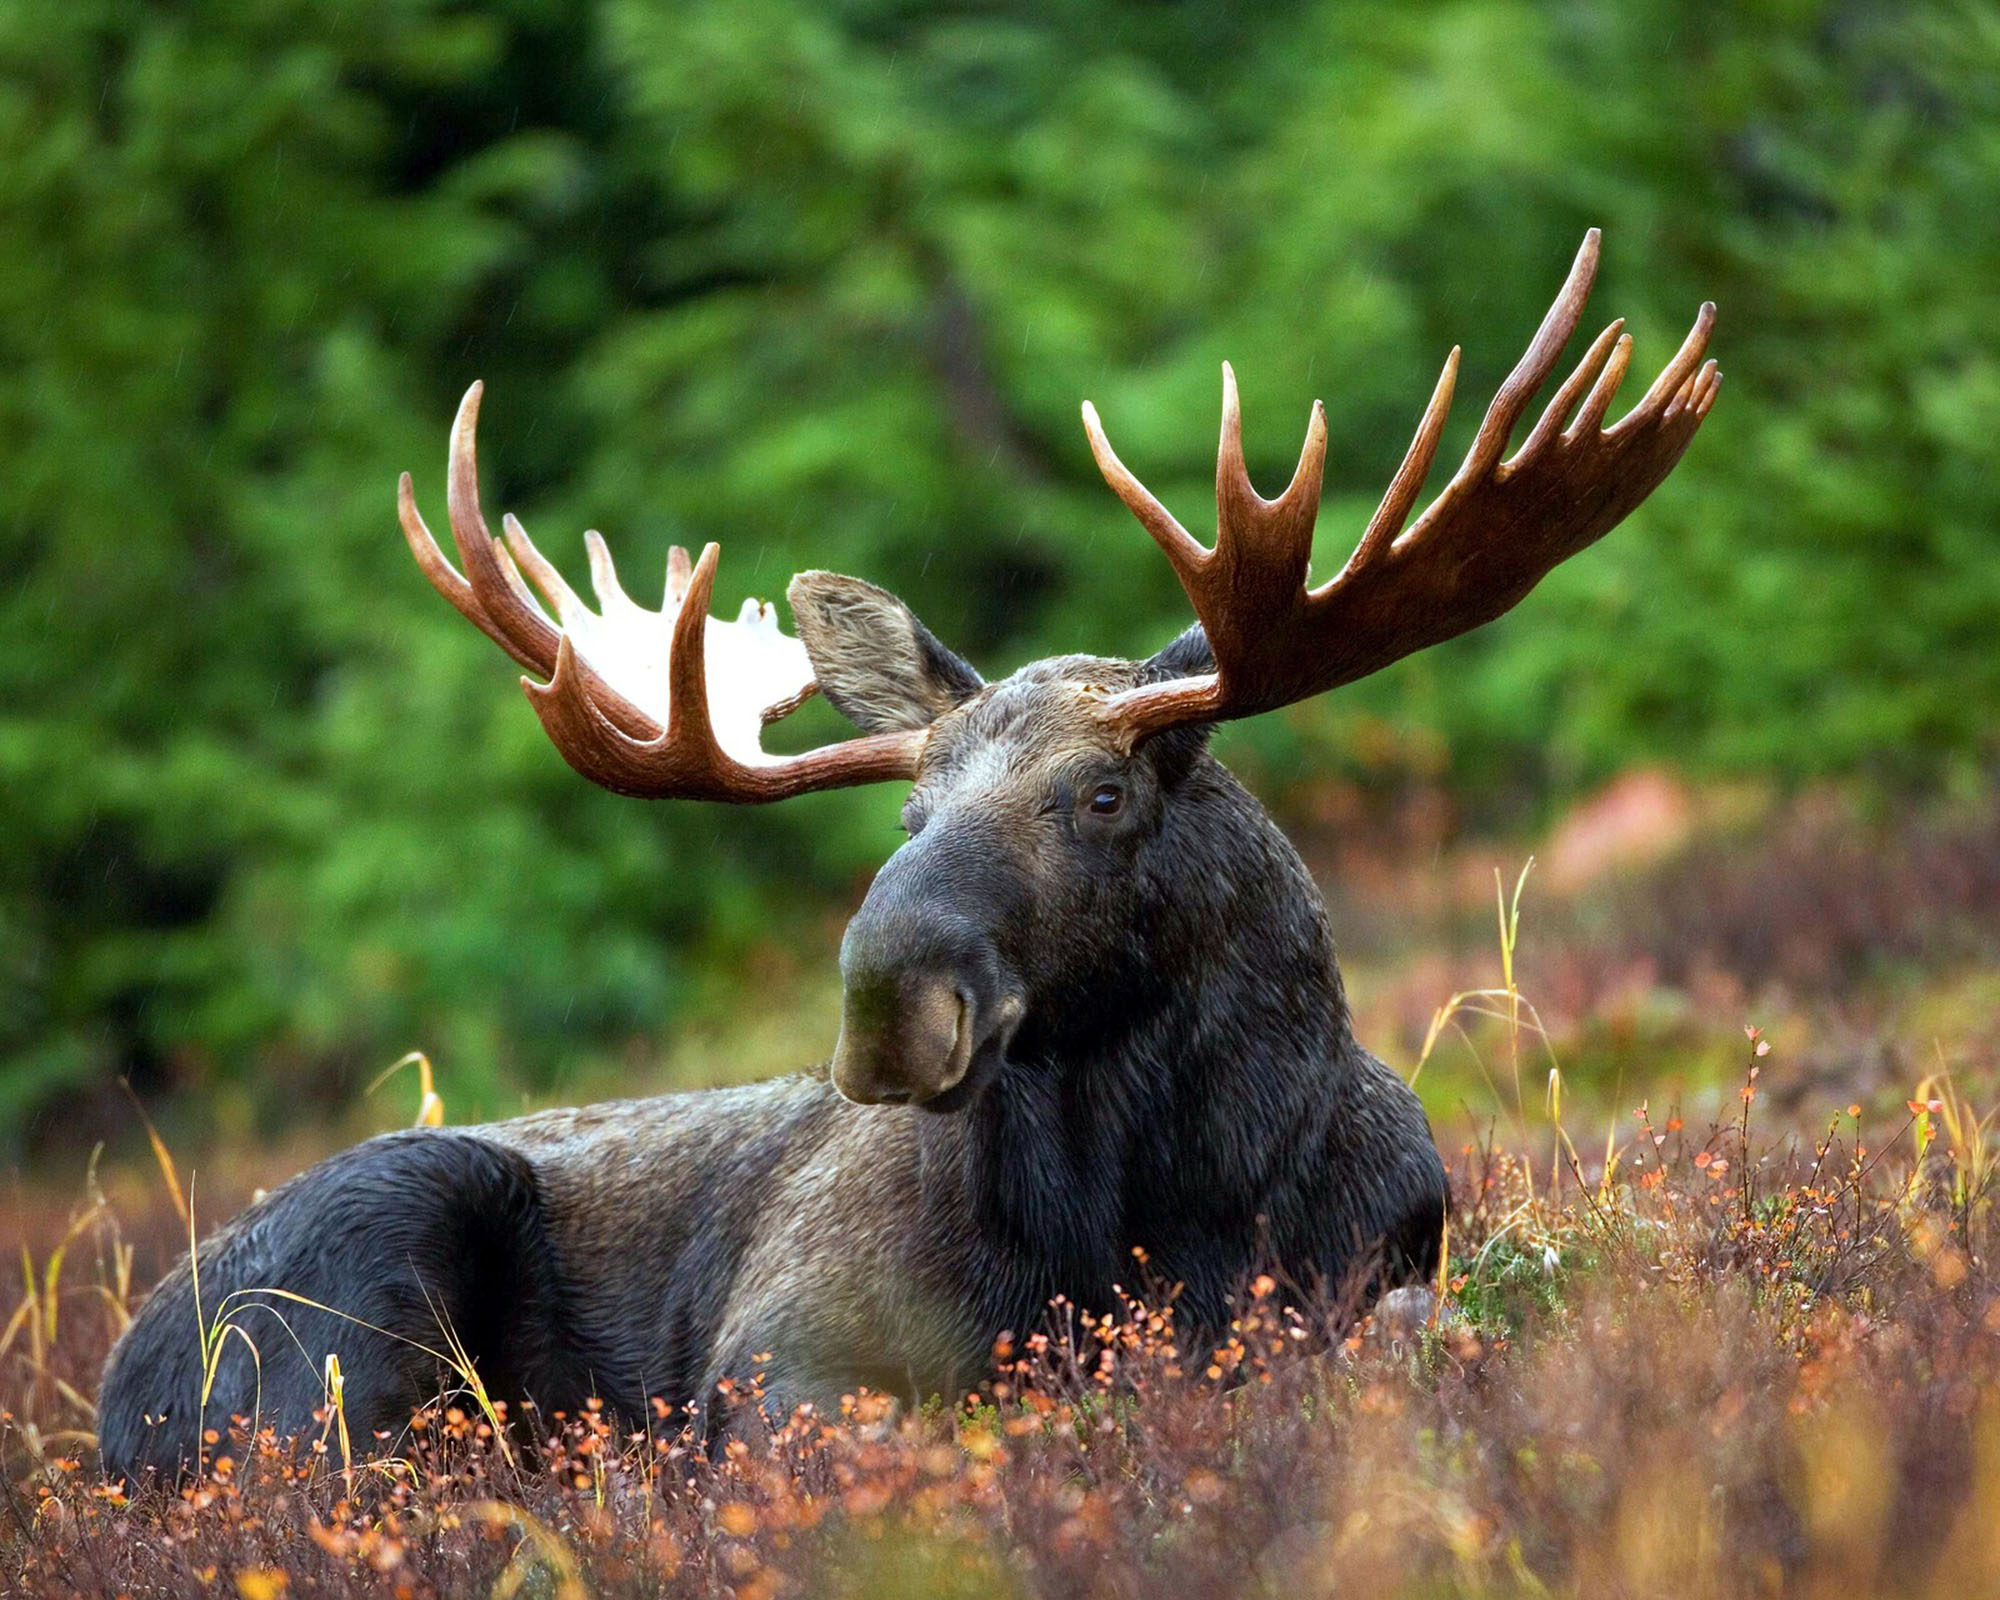 April showers bring new websites, birthdays, and a moose